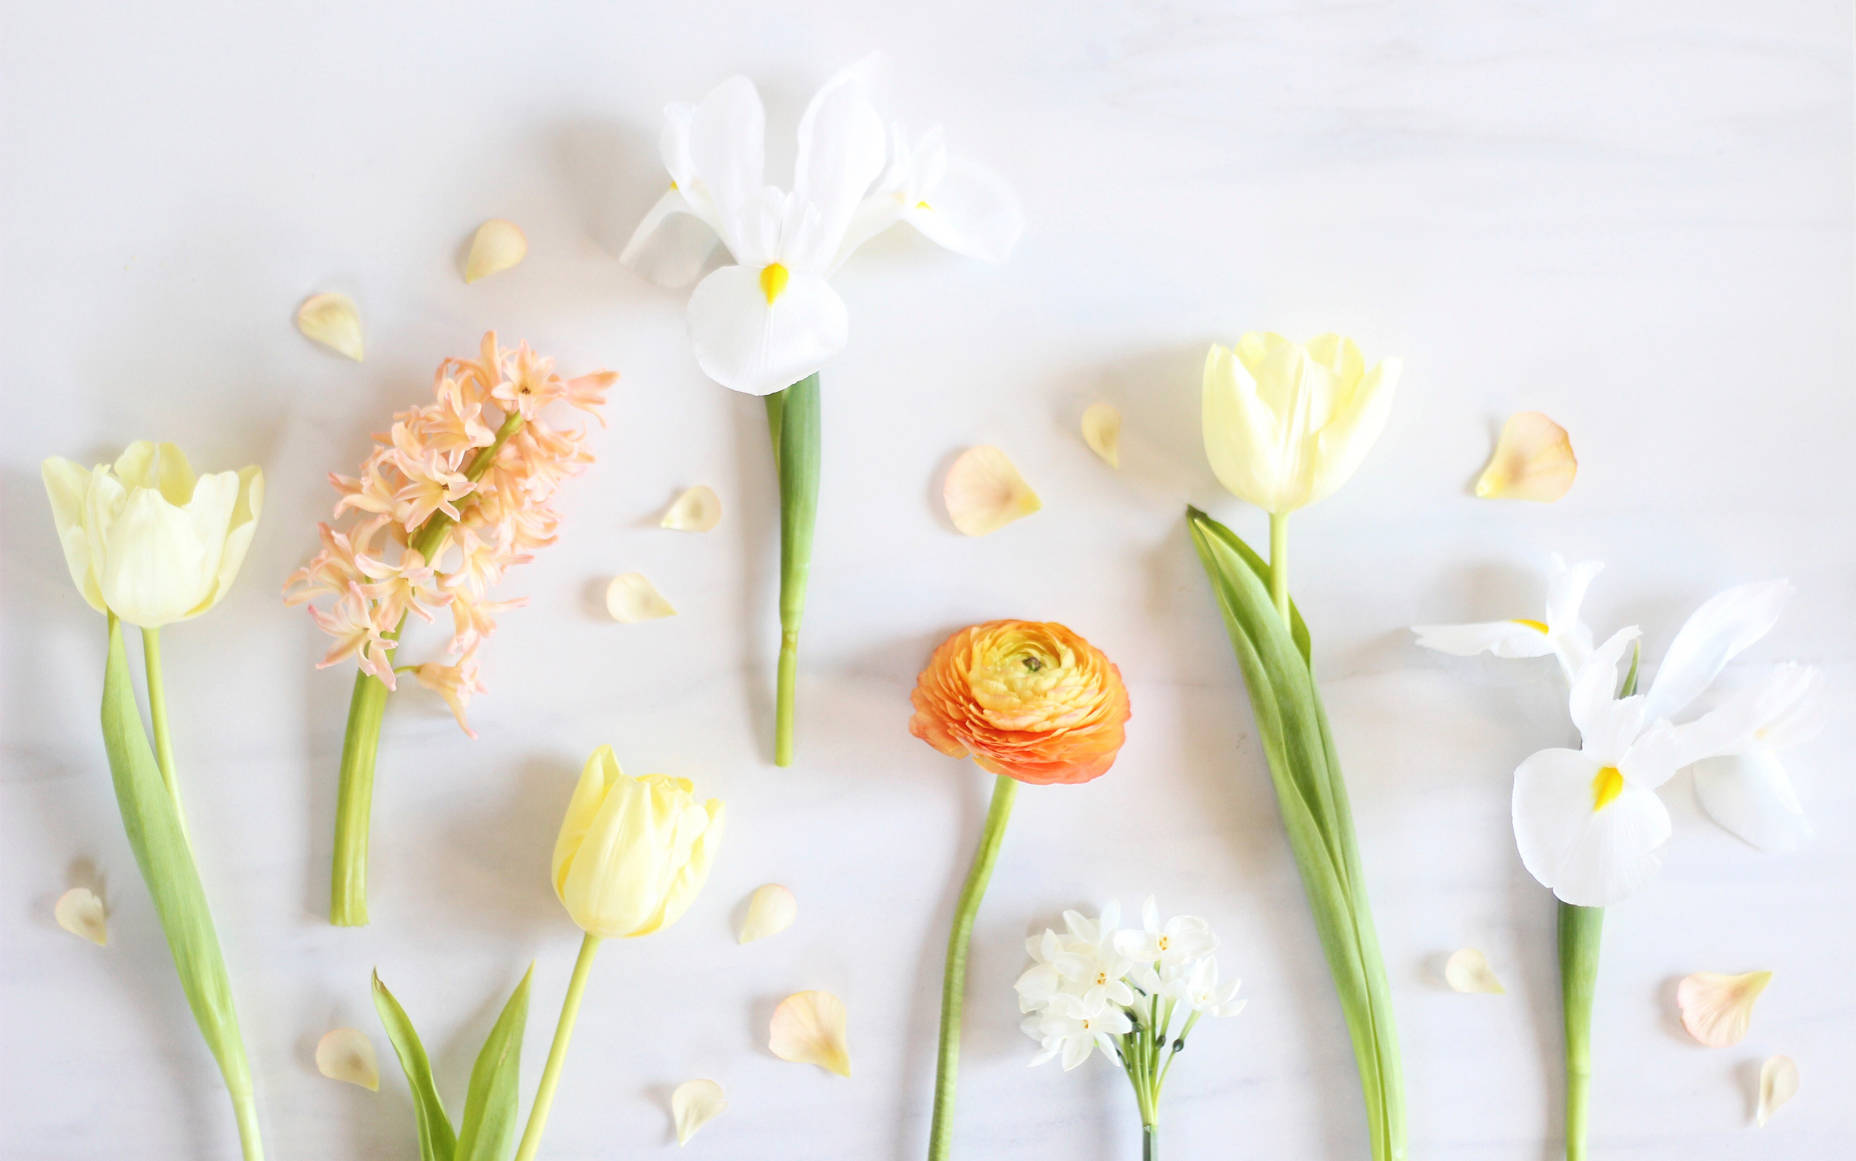 Enjoy the freshness of Spring with a minimalist mood. Wallpaper